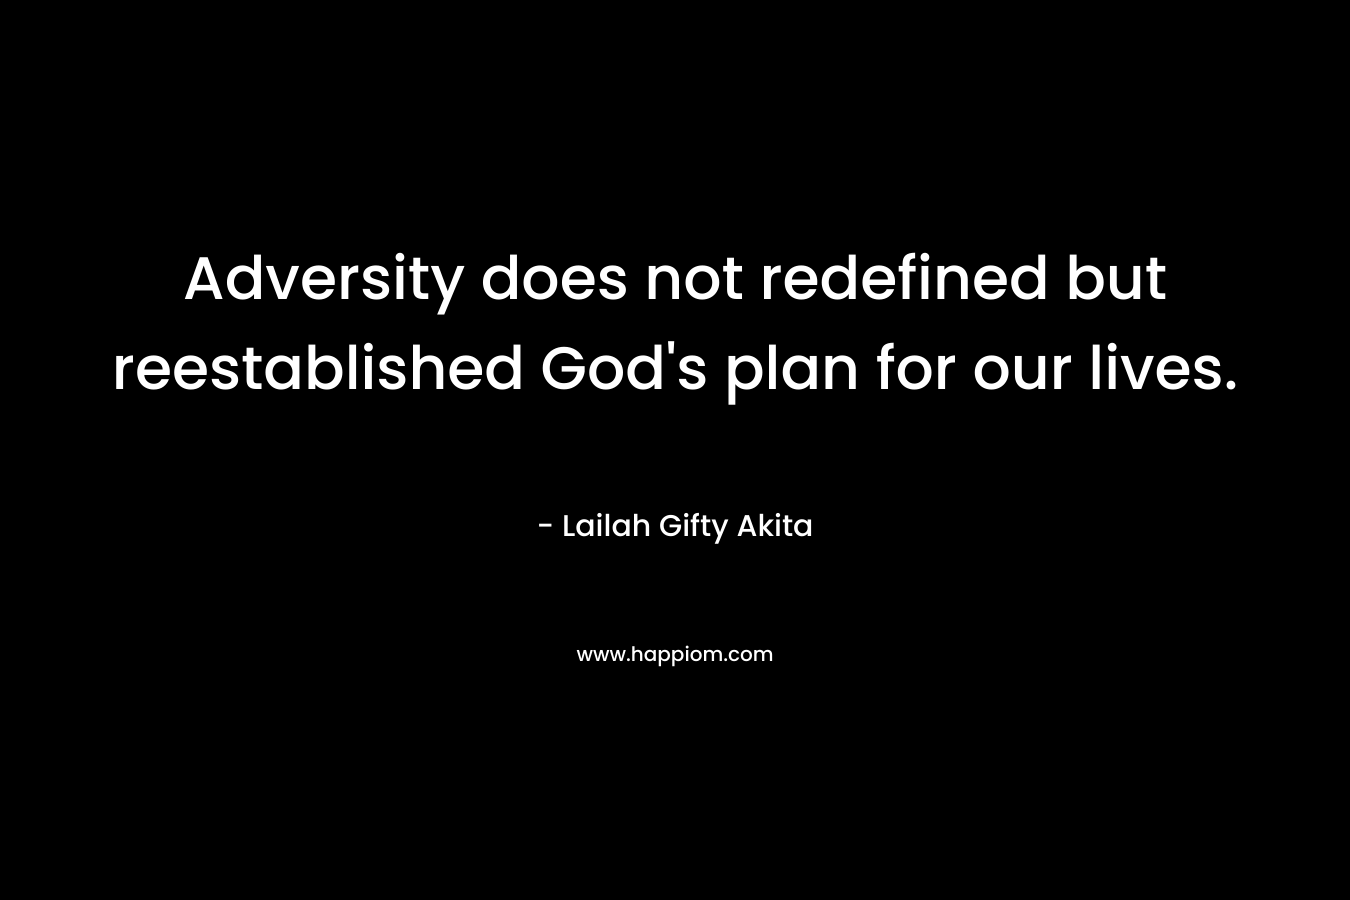 Adversity does not redefined but reestablished God’s plan for our lives. – Lailah Gifty Akita